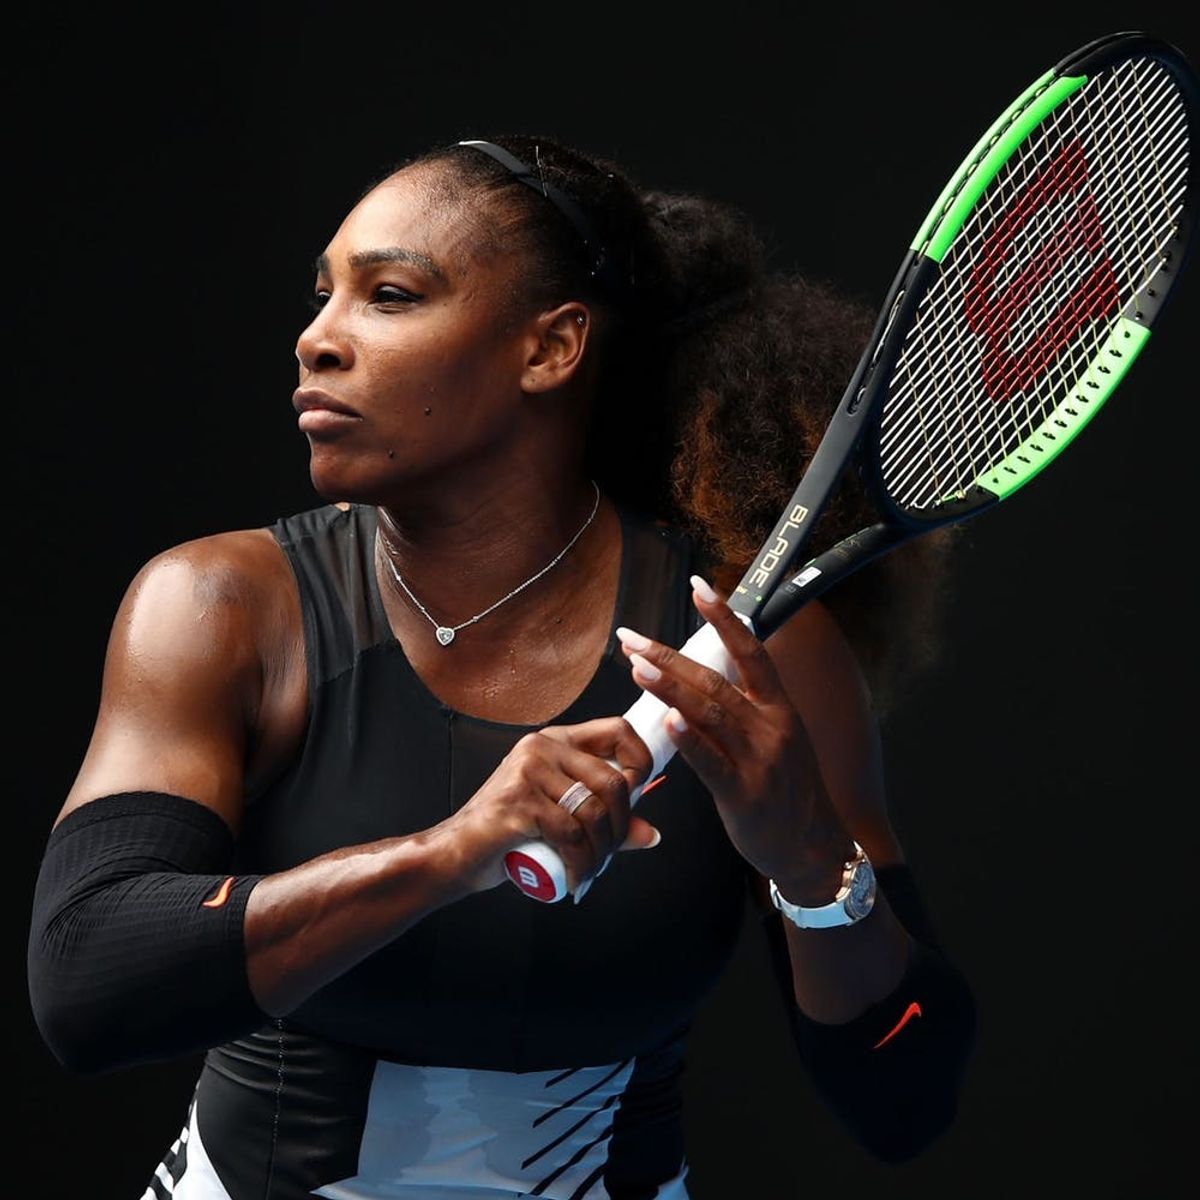 Serena Williams Withdraws from Australian Open: “I’m Not Where I Want to Be”